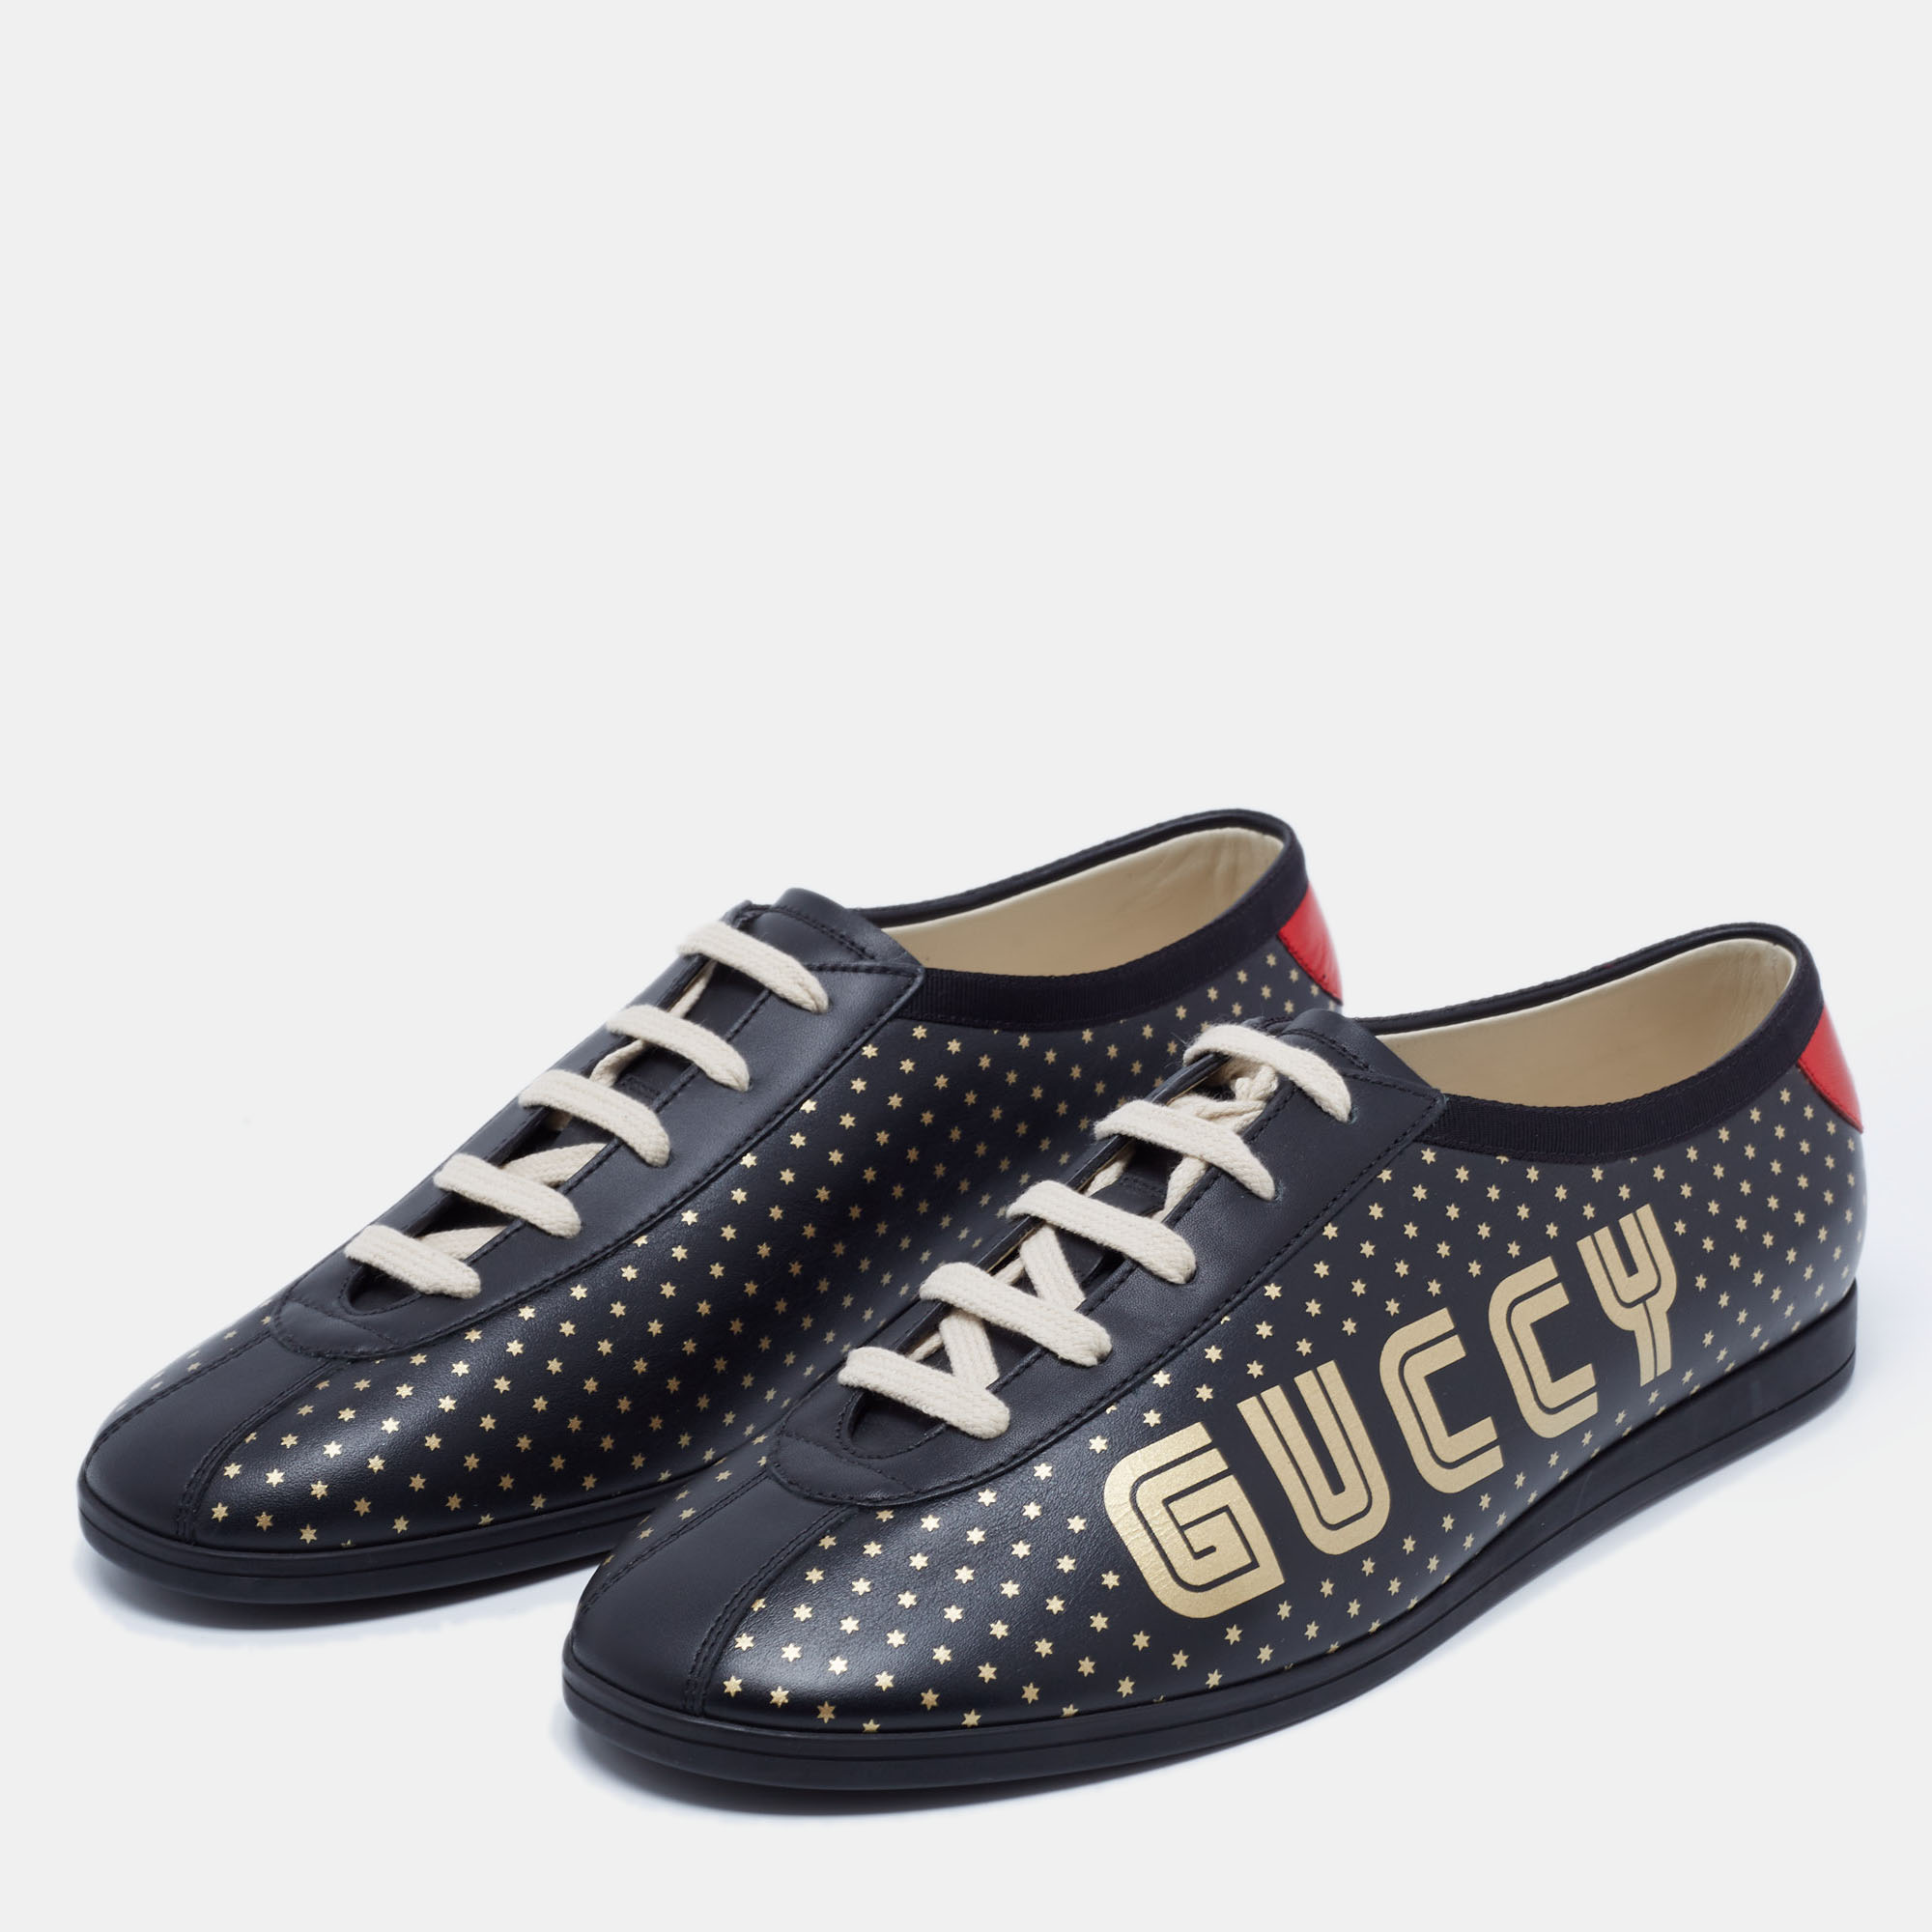 

Gucci Black Star Print Leather Guccy Falacer Low Top Sneakers Size